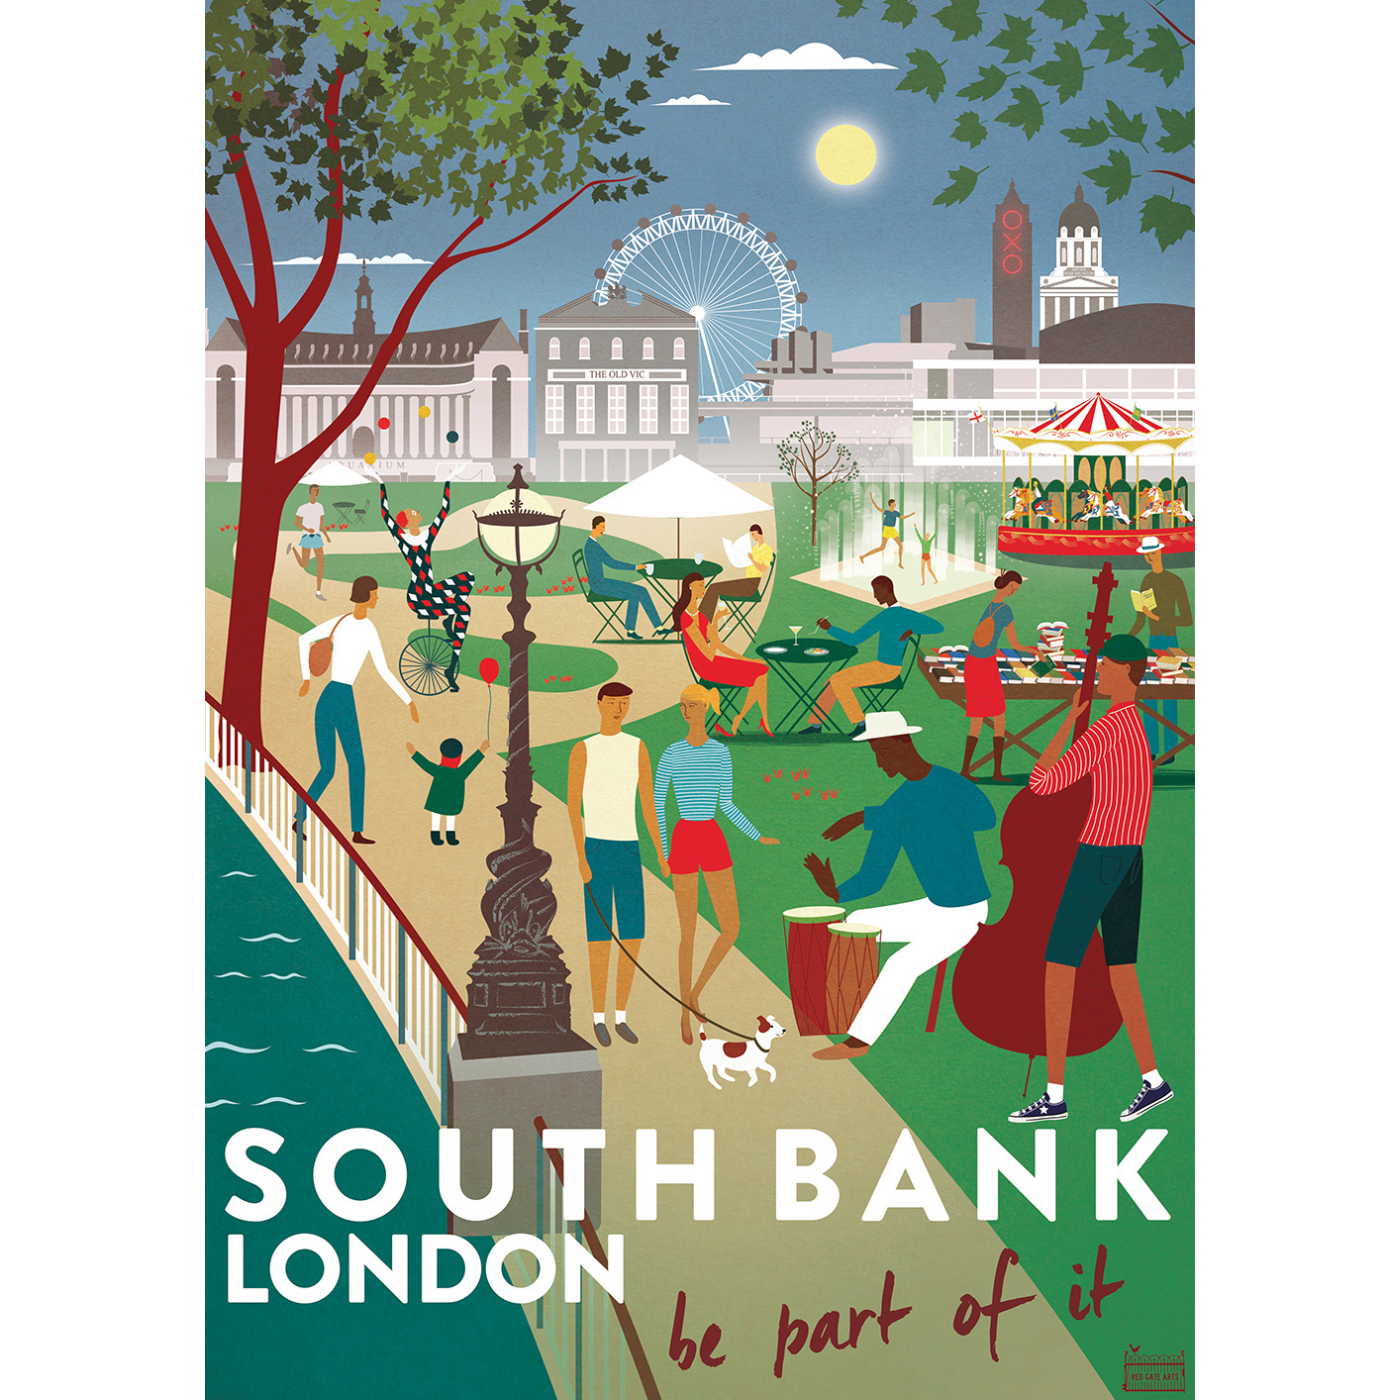 A poster with an illustration of people walking down the Southbank riverside during the Summer month.